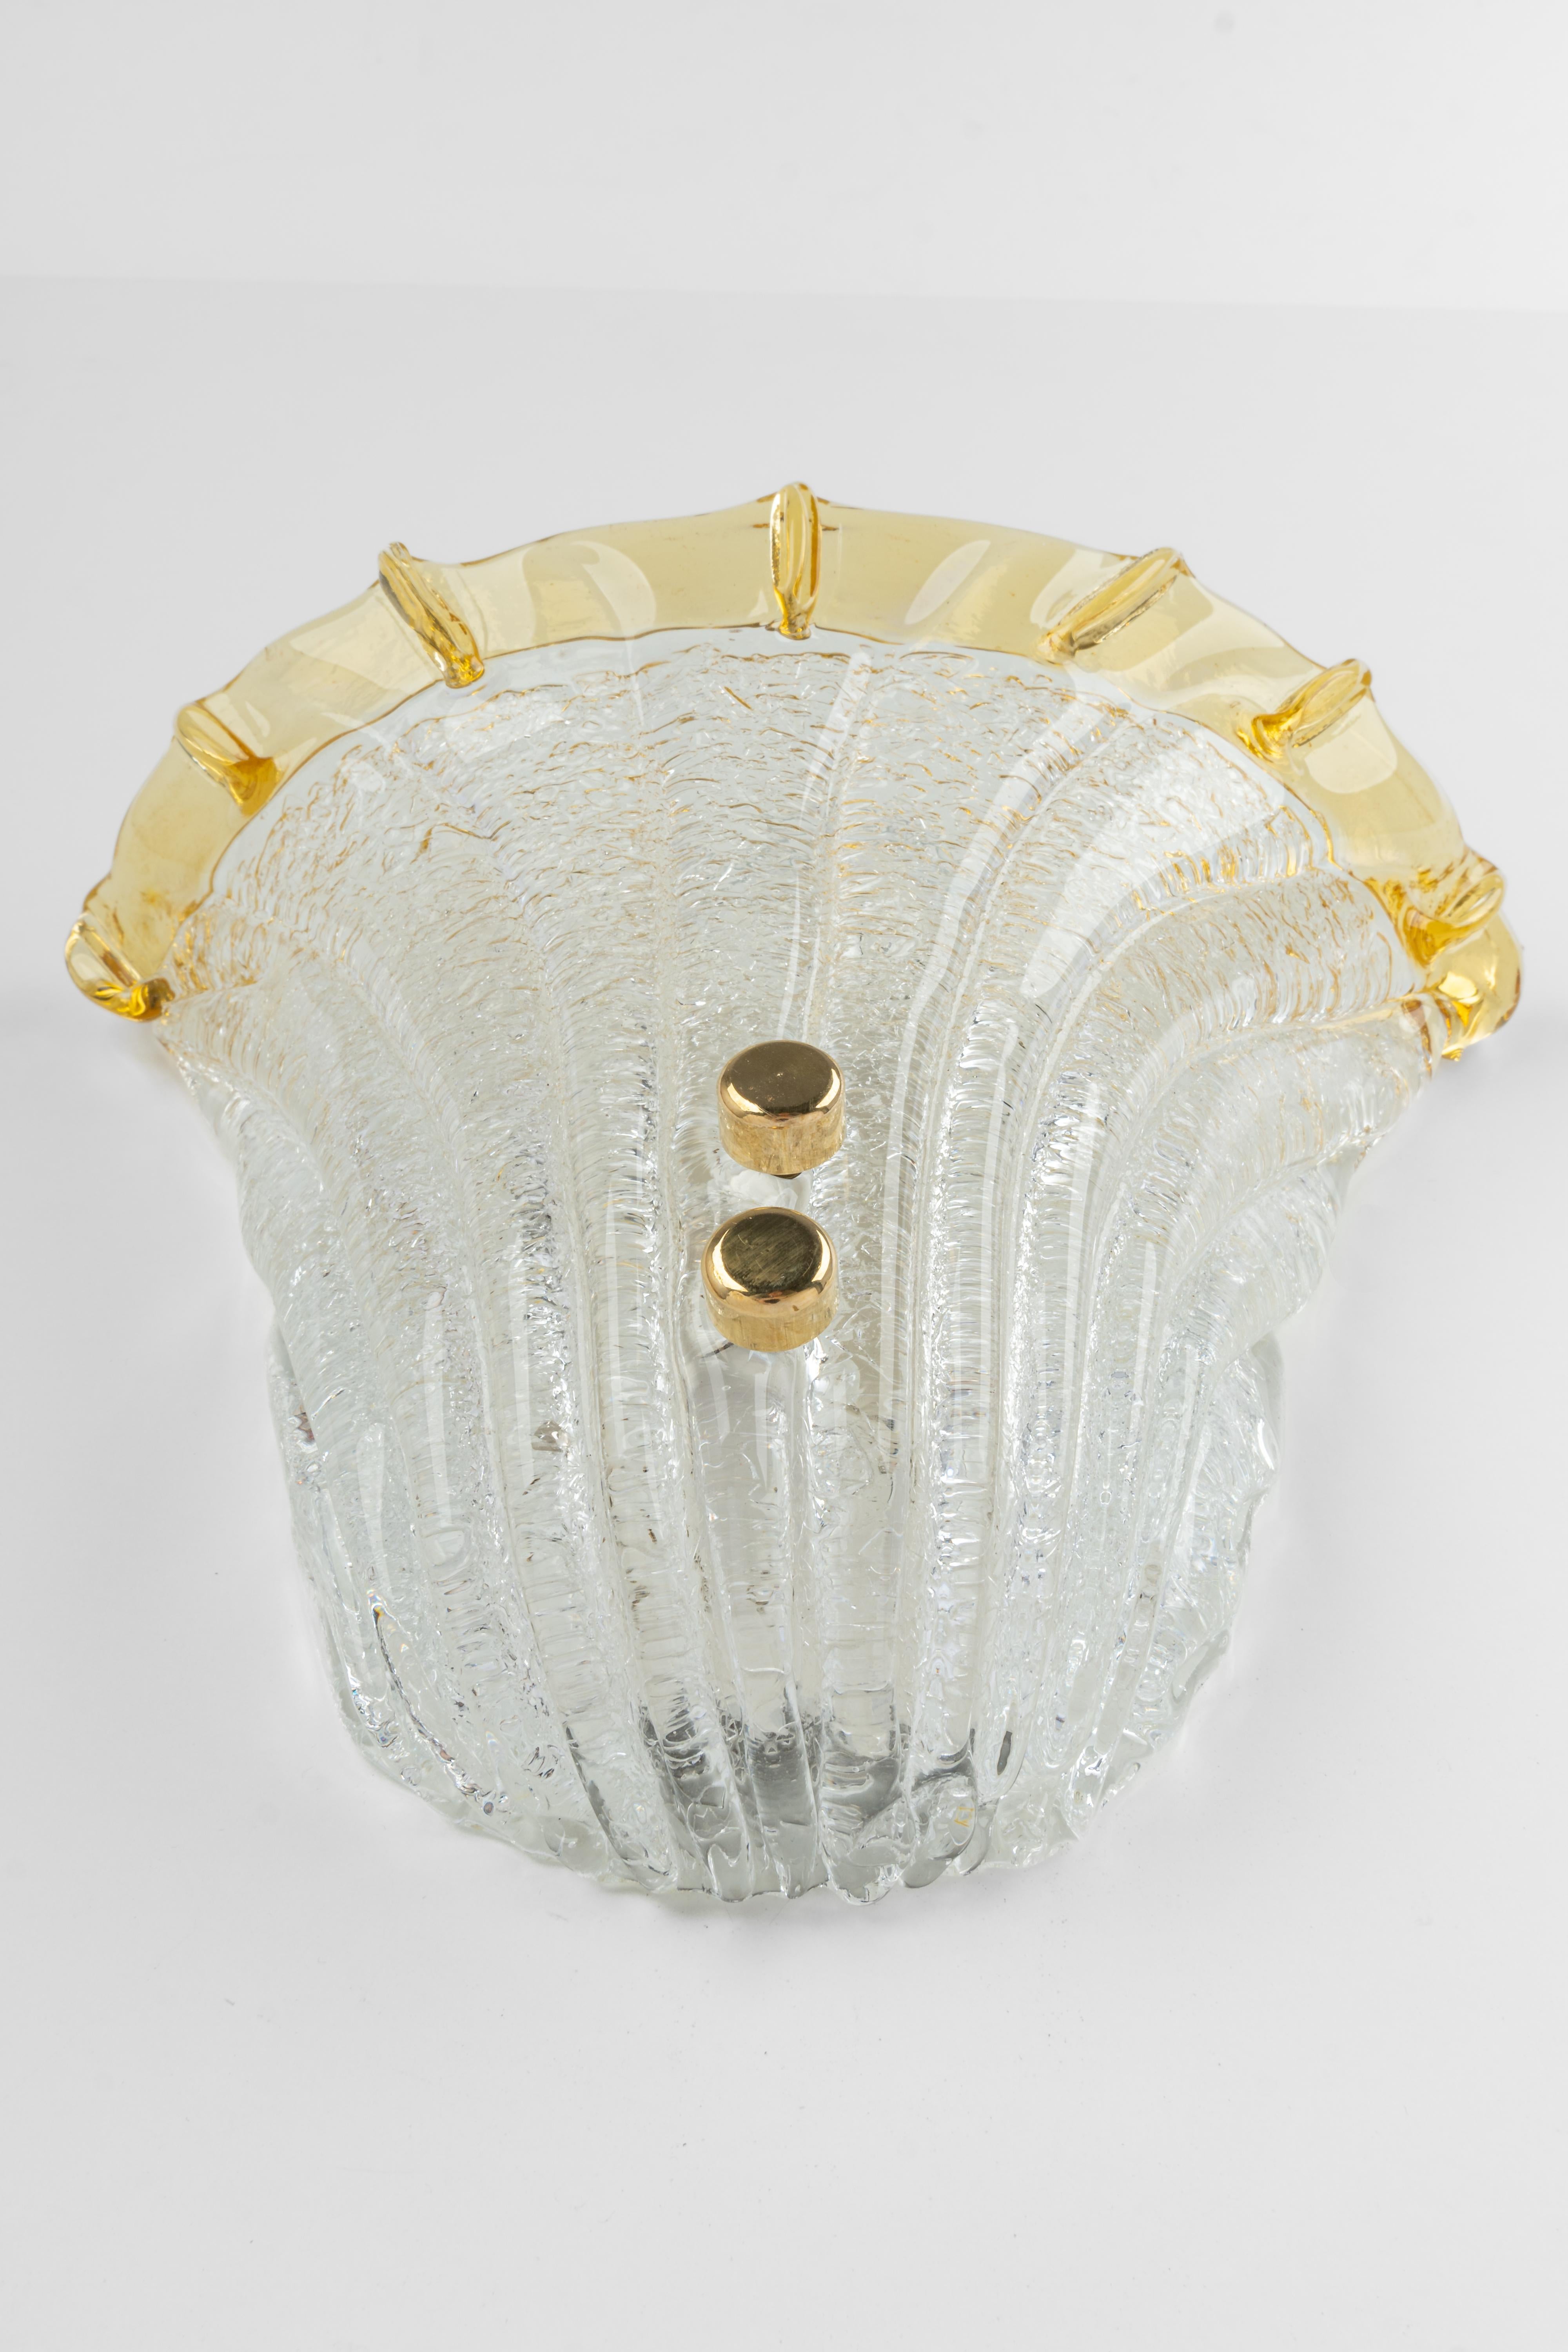 Pair of Murano Glass Wall Light in Venini Style, Italy, 1970s For Sale 3